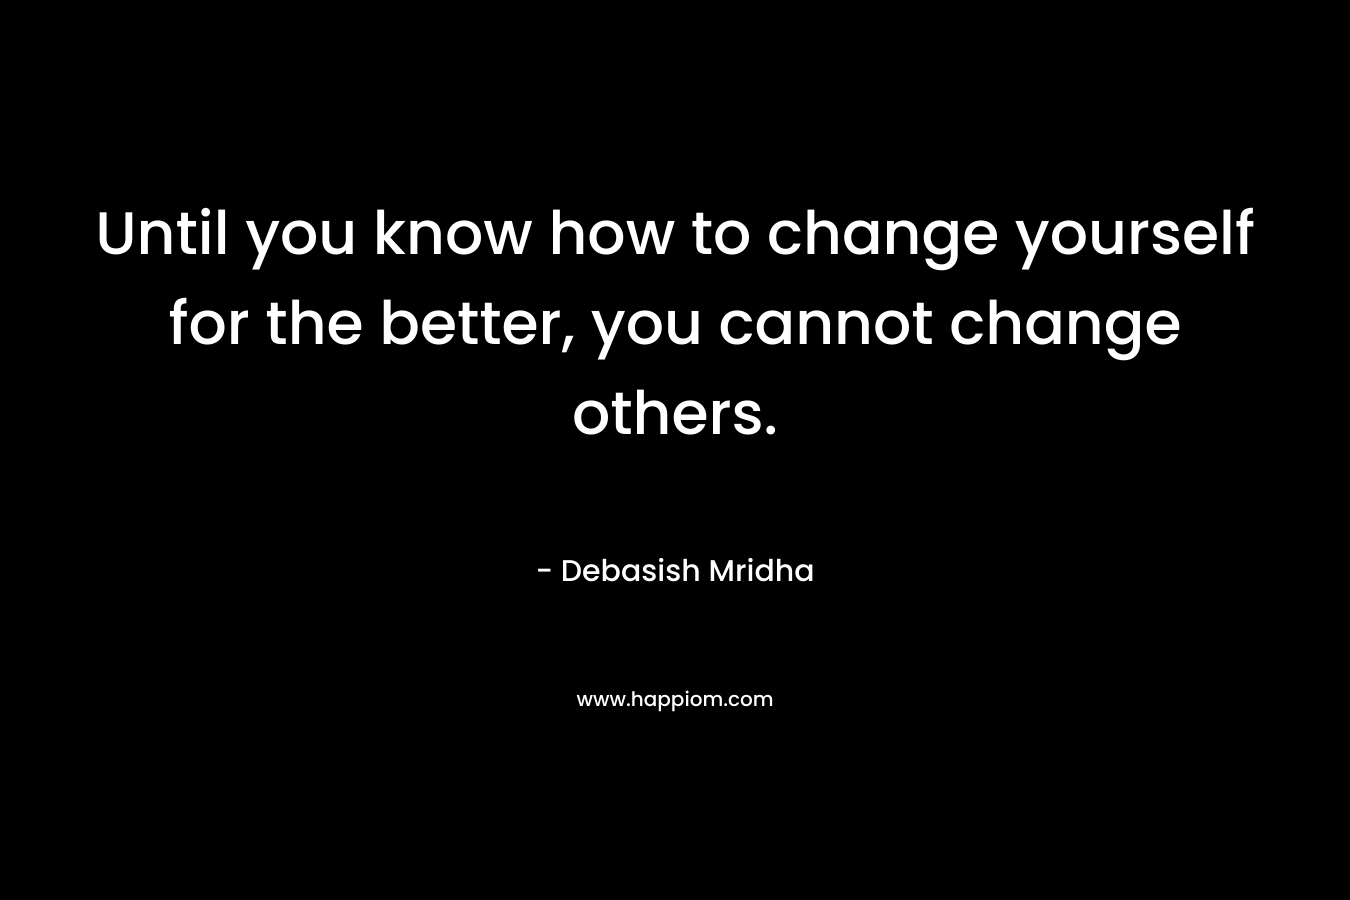 Until you know how to change yourself for the better, you cannot change others.